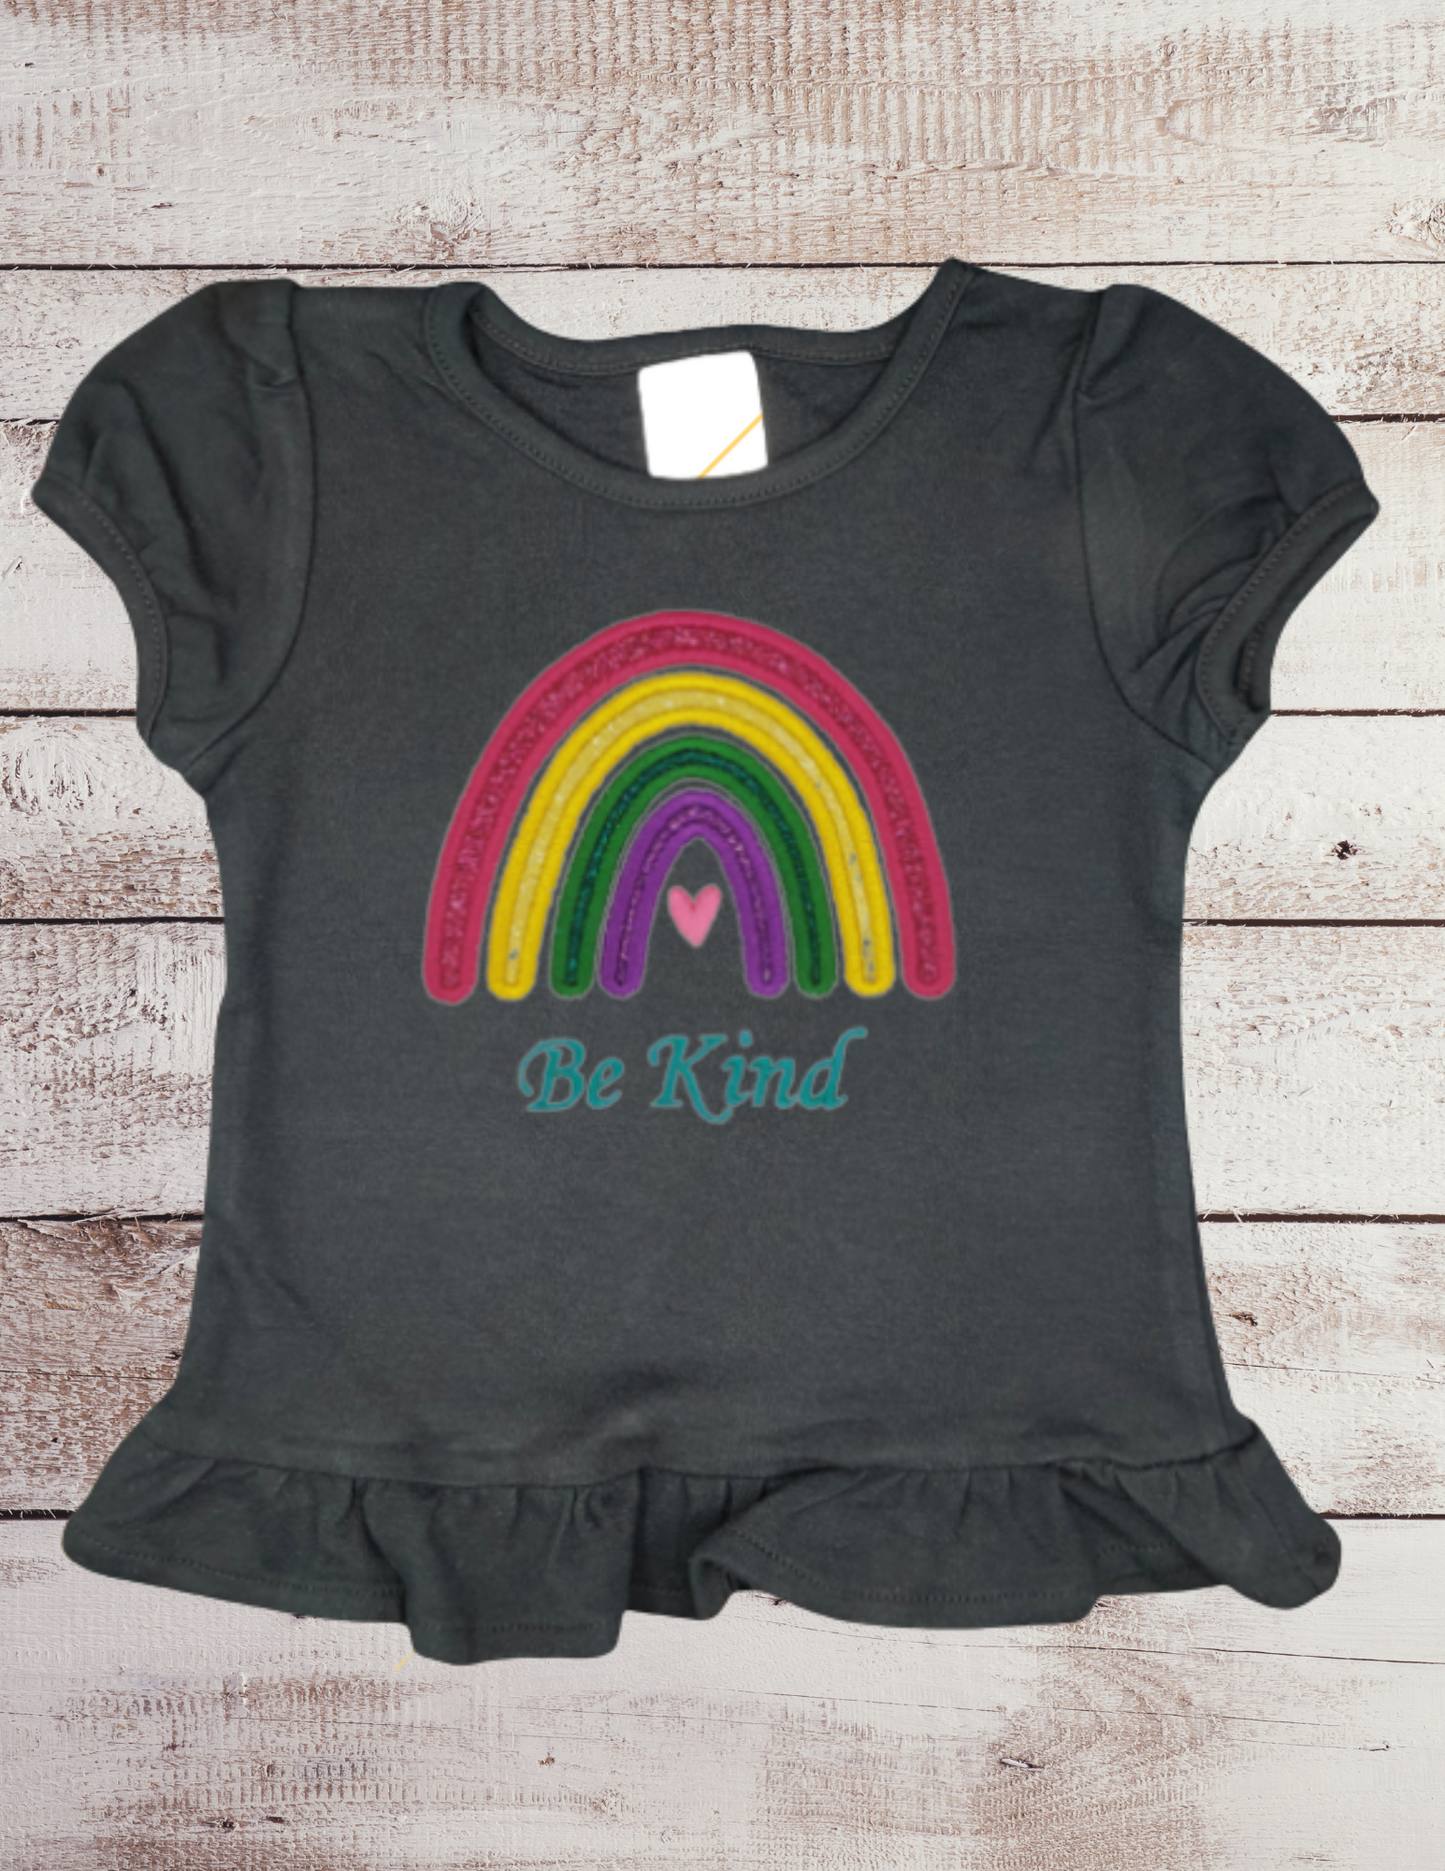 Be Kind - Toddler Top